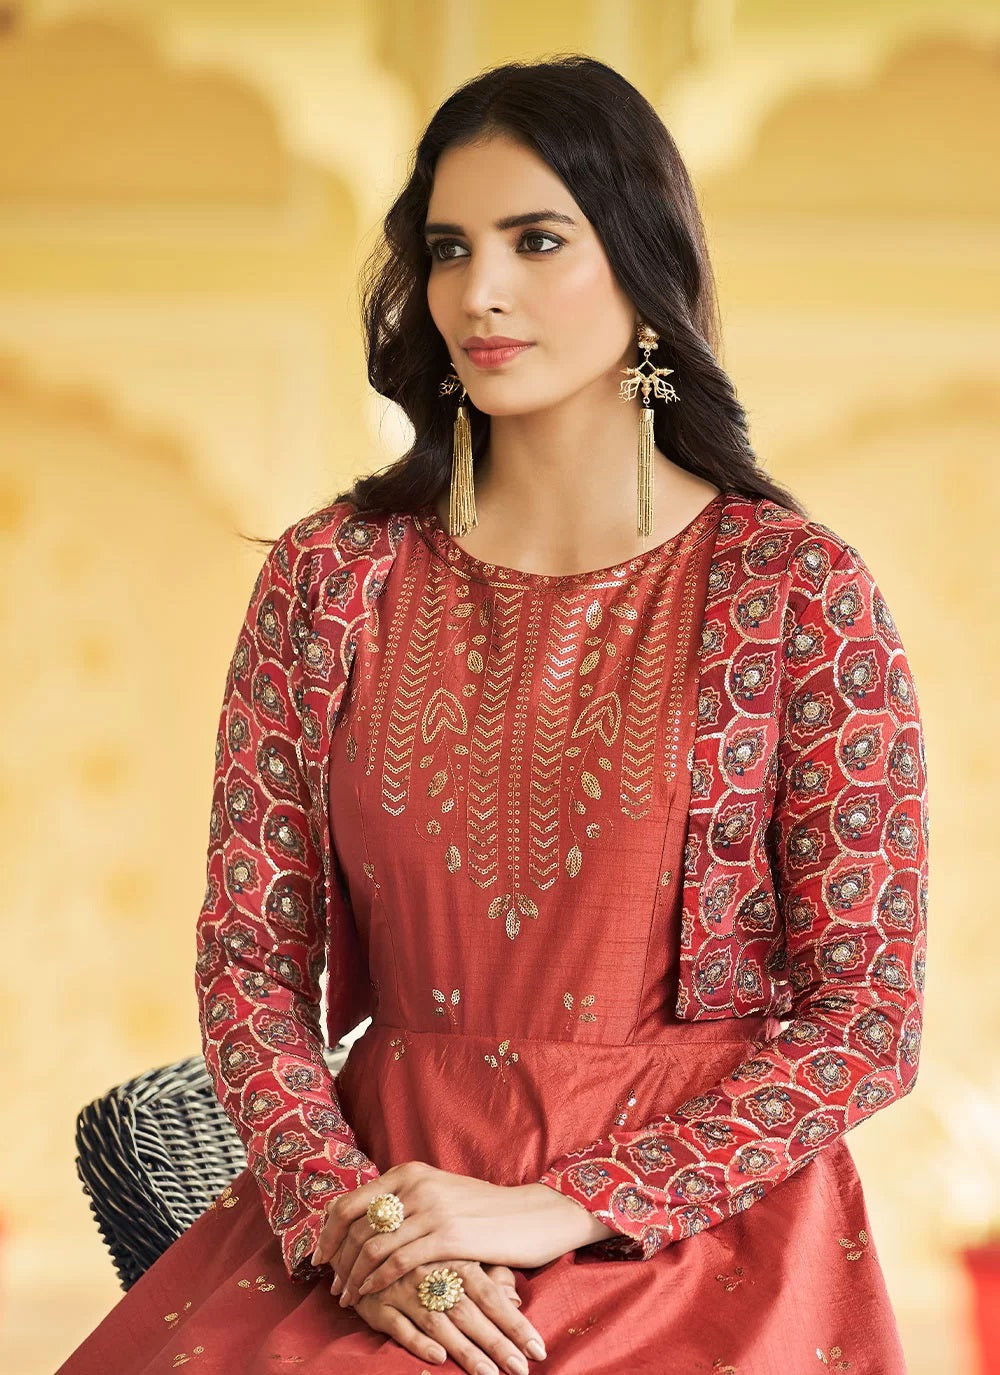 Orange Cotton Embroidery work Gown For Women